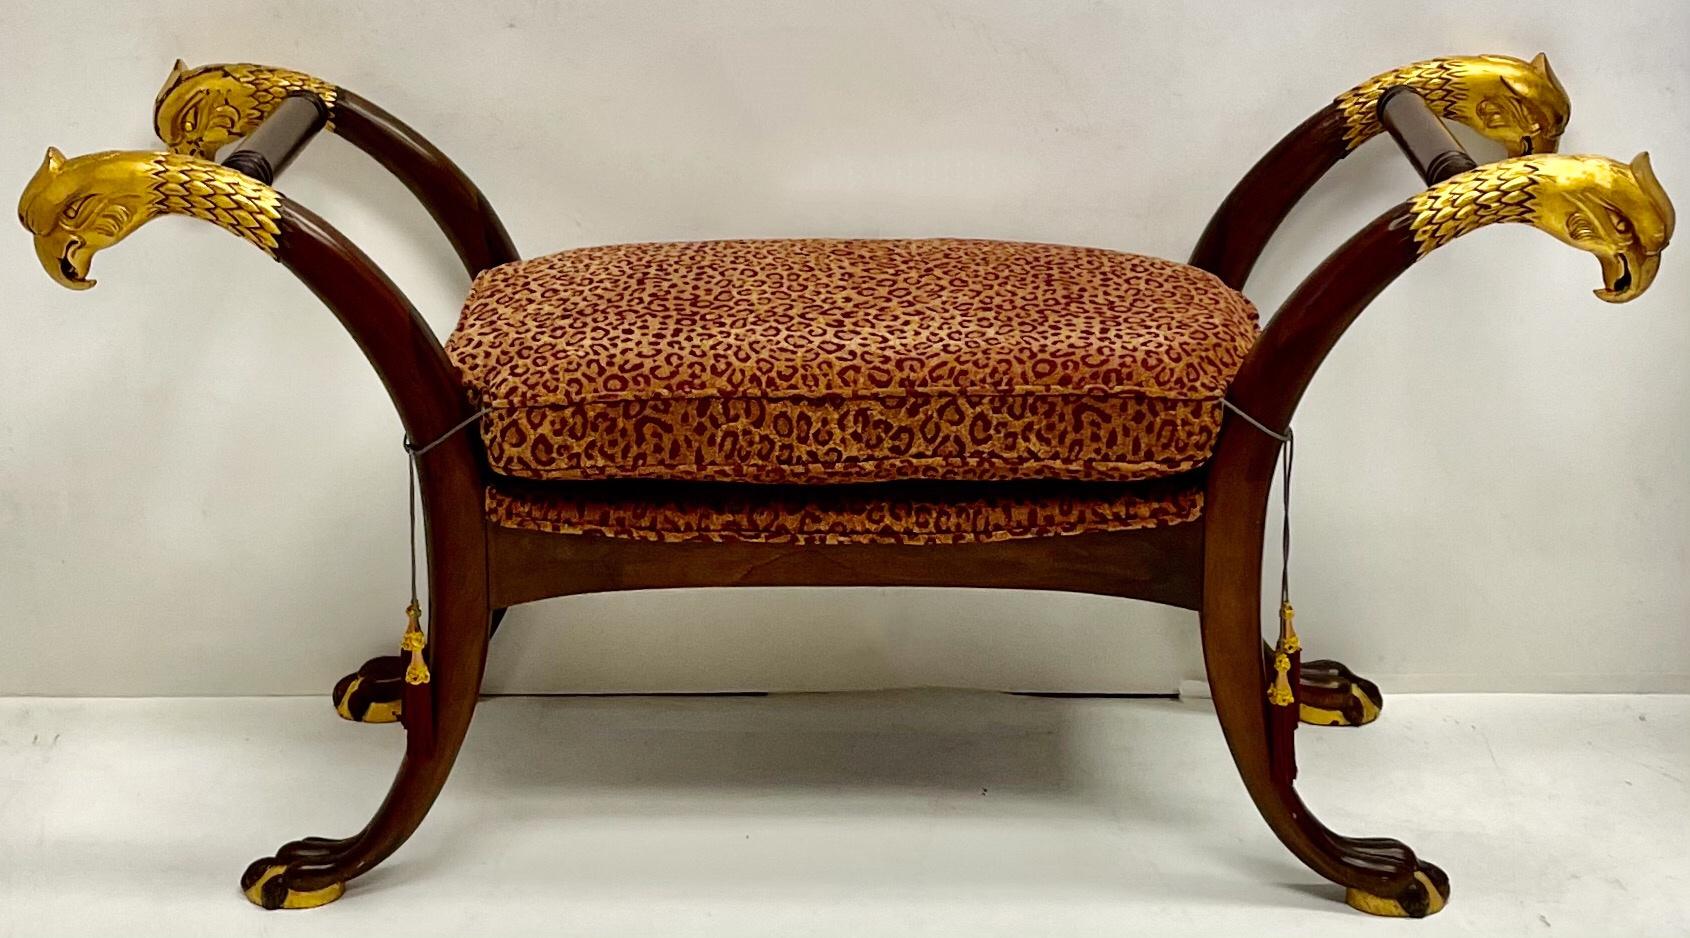 Upholstery French Empire Style Gilt Eagle and Mahogany Bench Attributed to Maitland-Smith